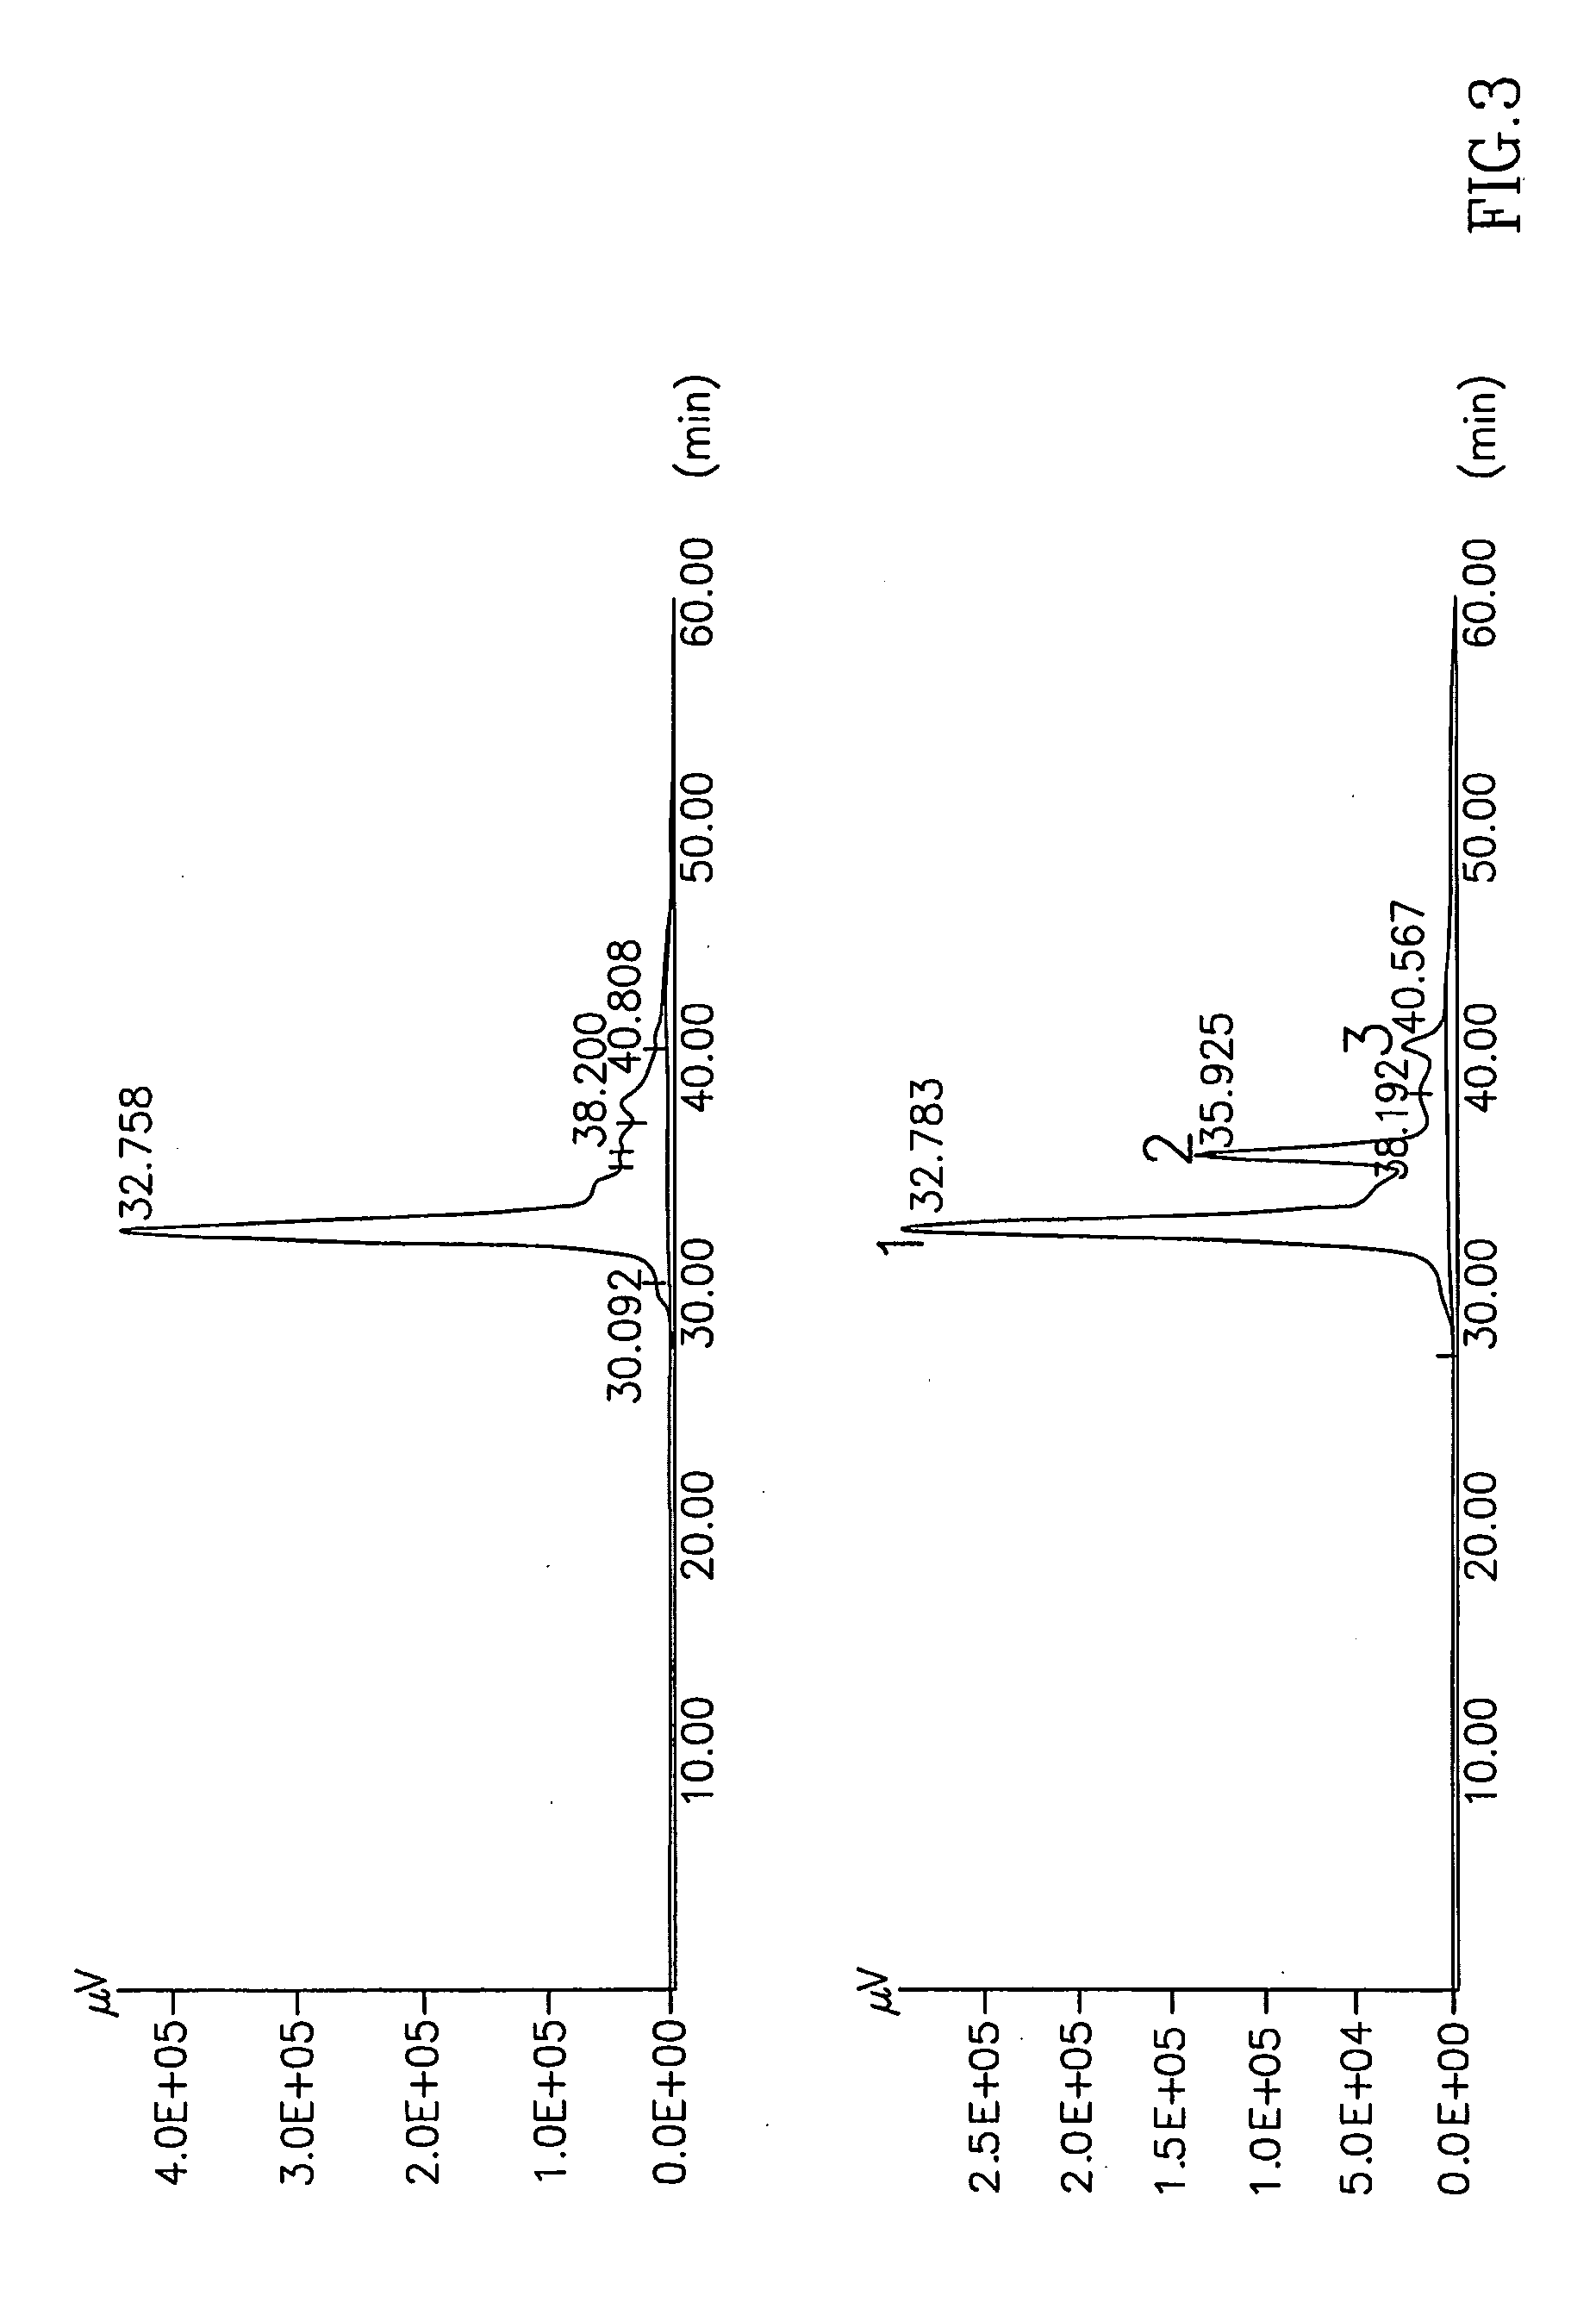 Debriding composition from bromelain and methods of production thereof